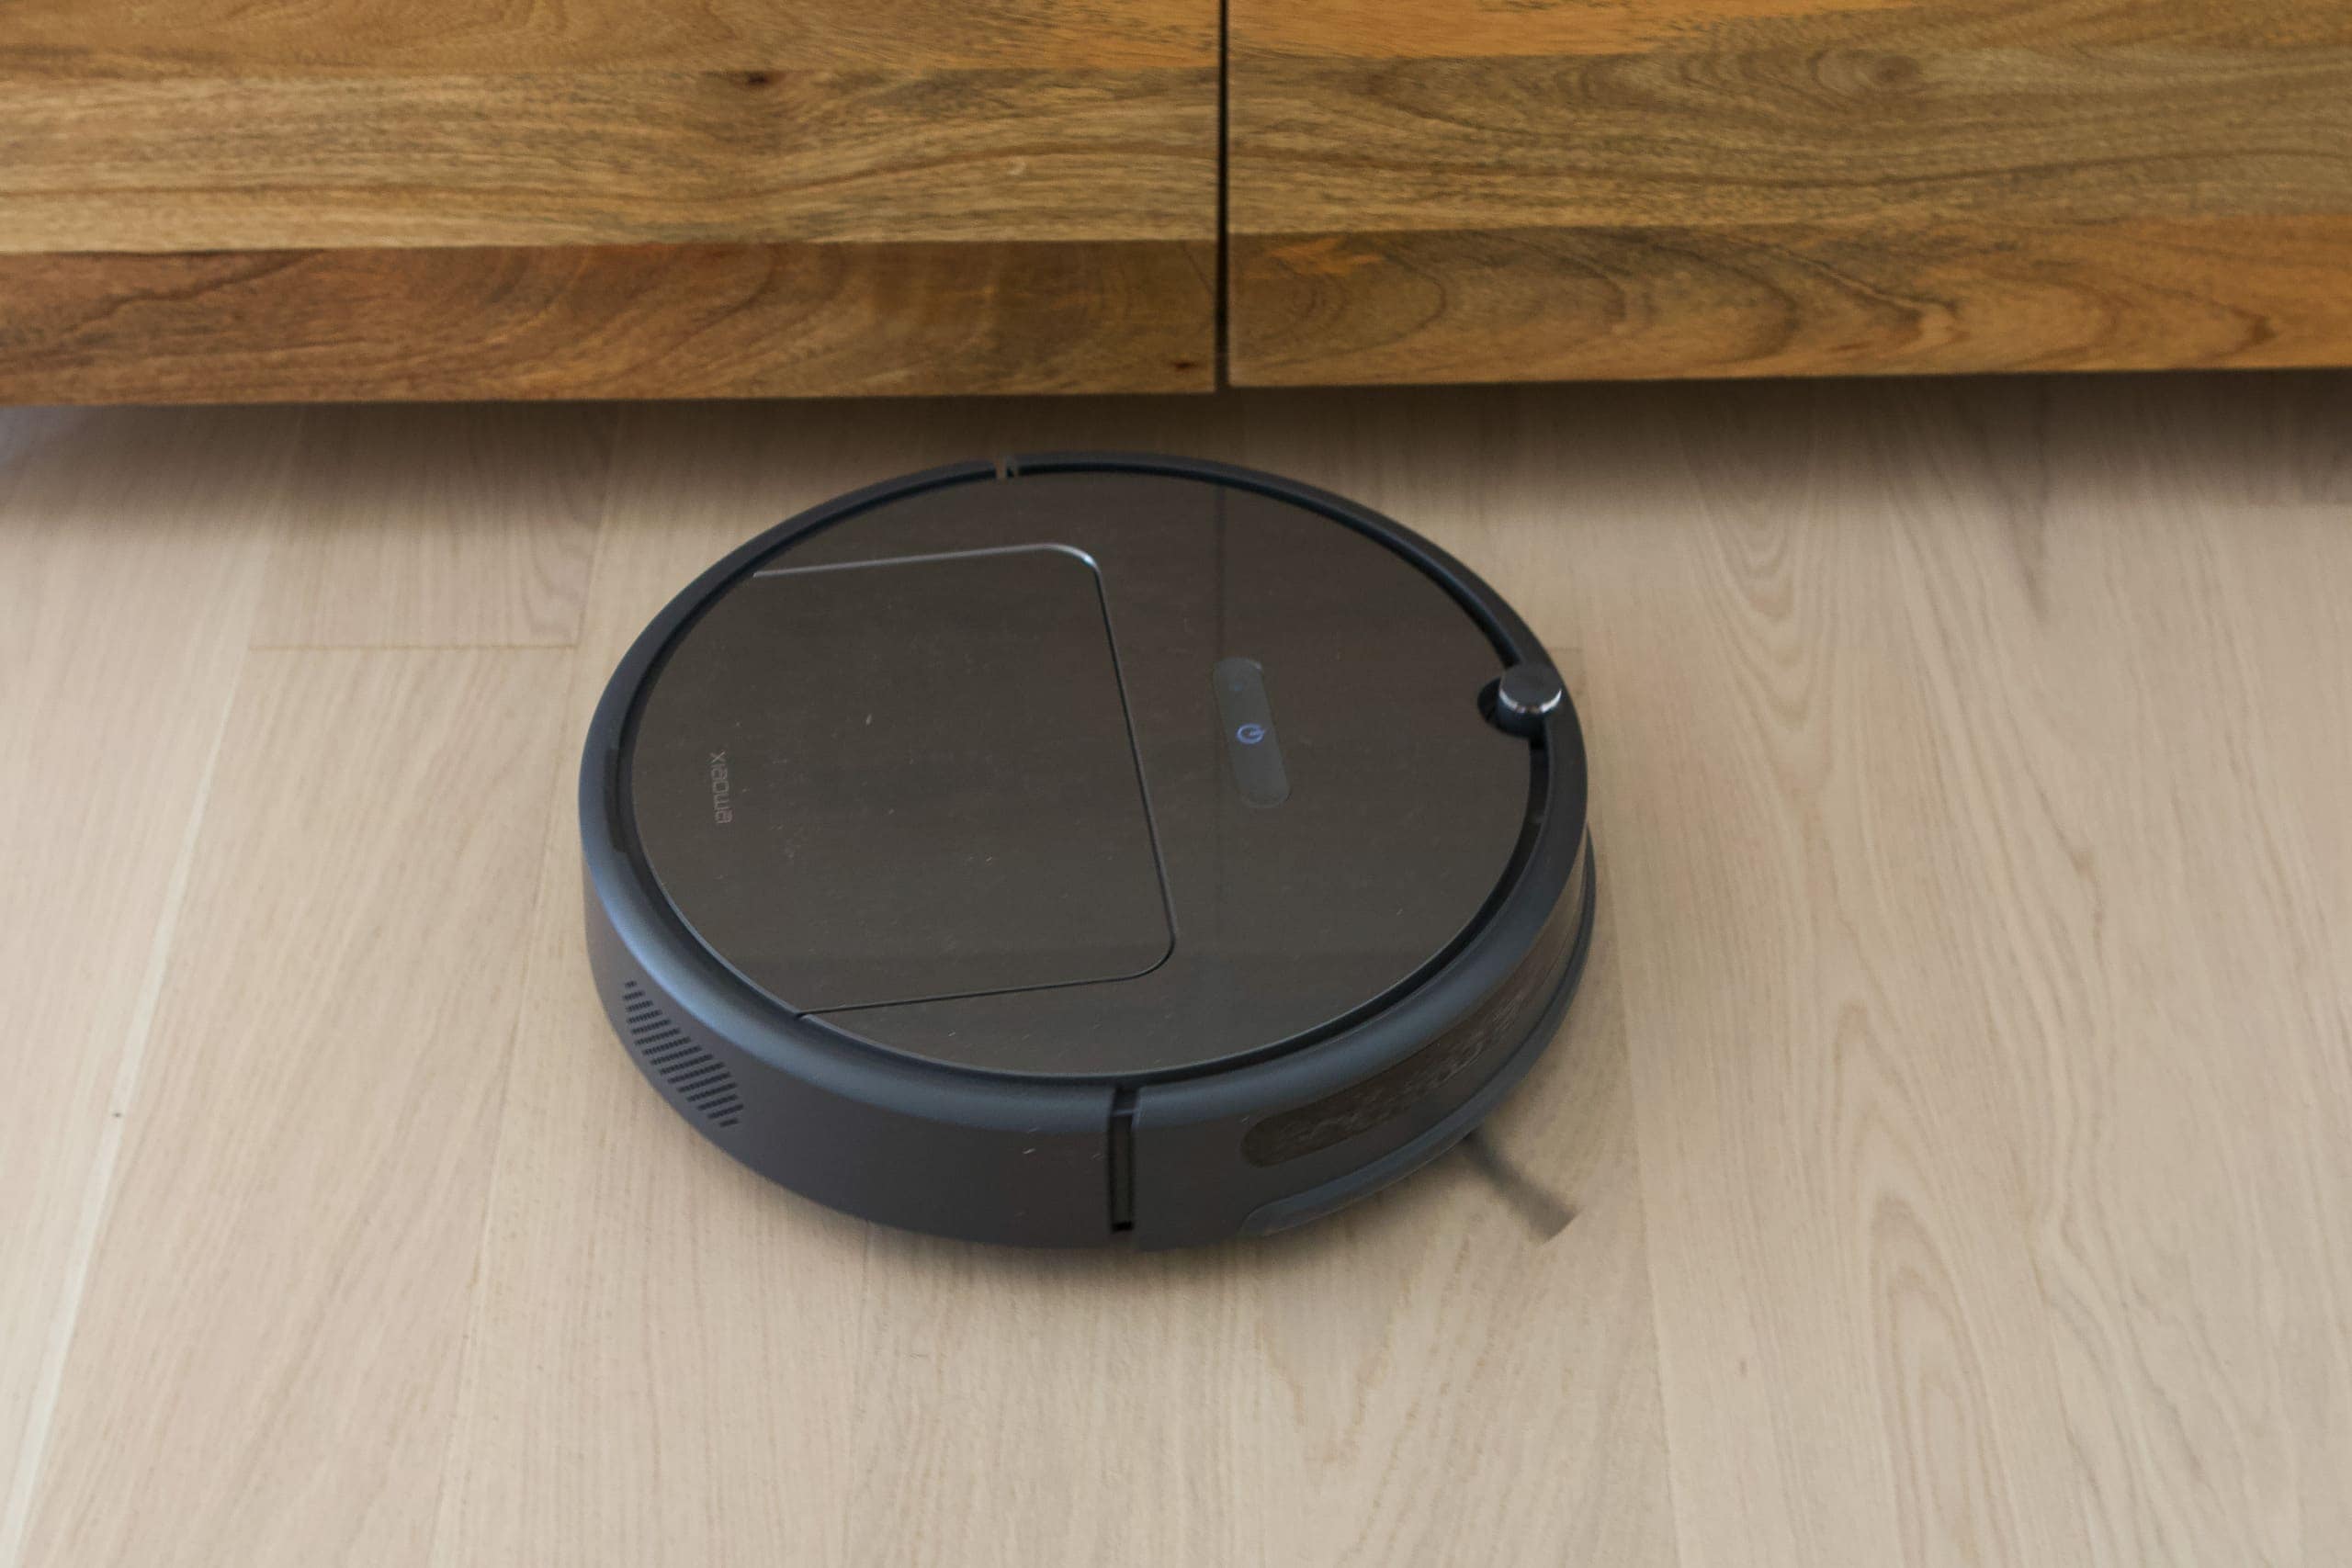 Our new robot vacuum named Huck